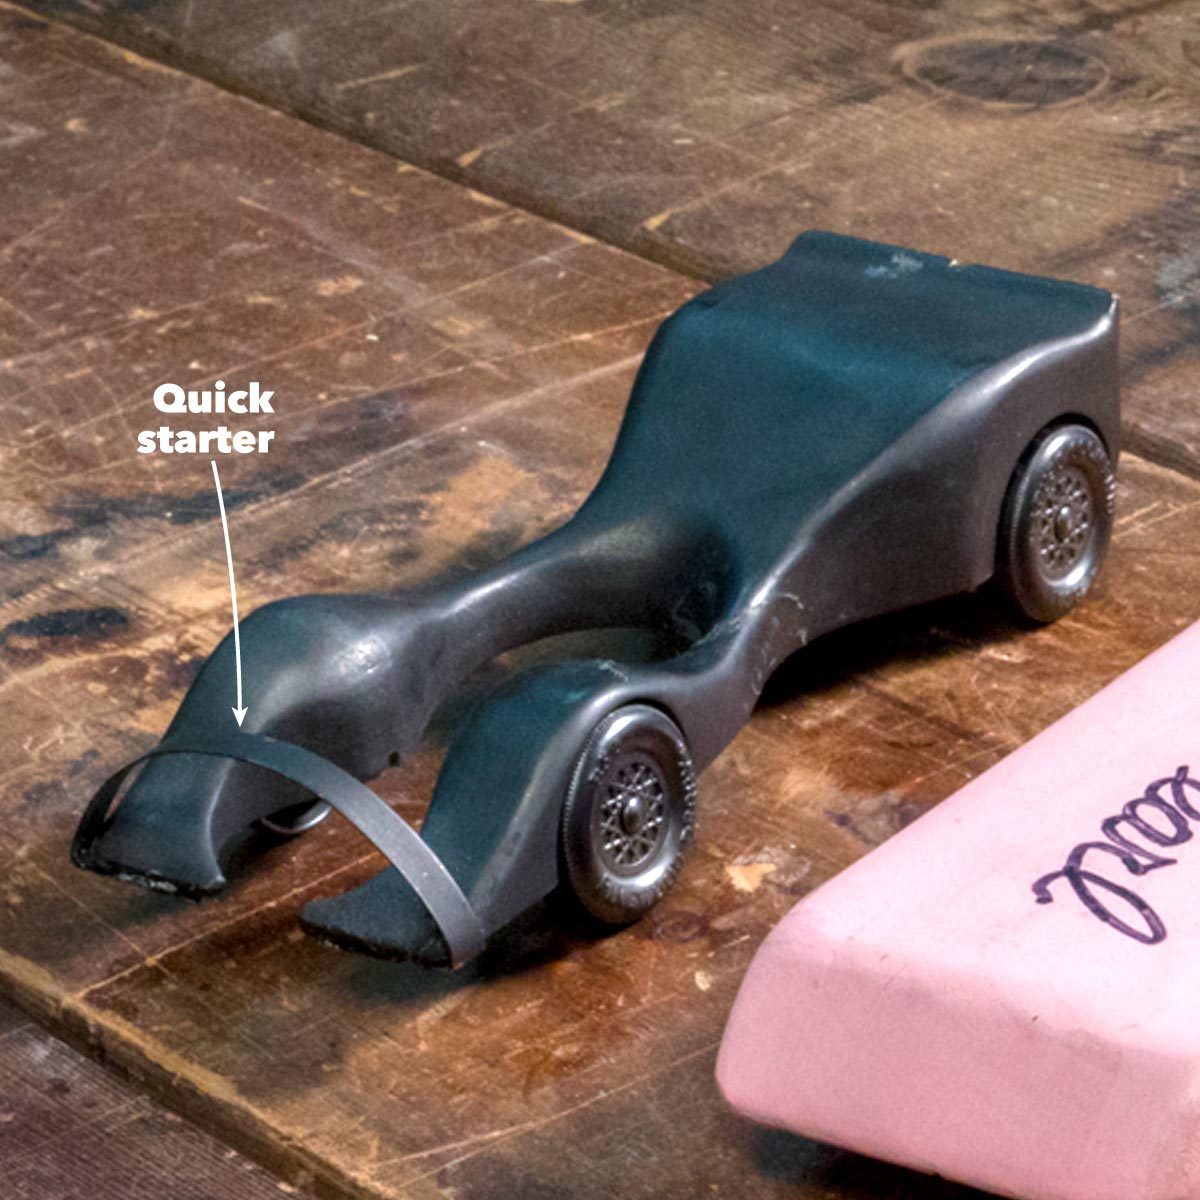 How to Build the Fastest Pinewood Derby Car | Family Handyman